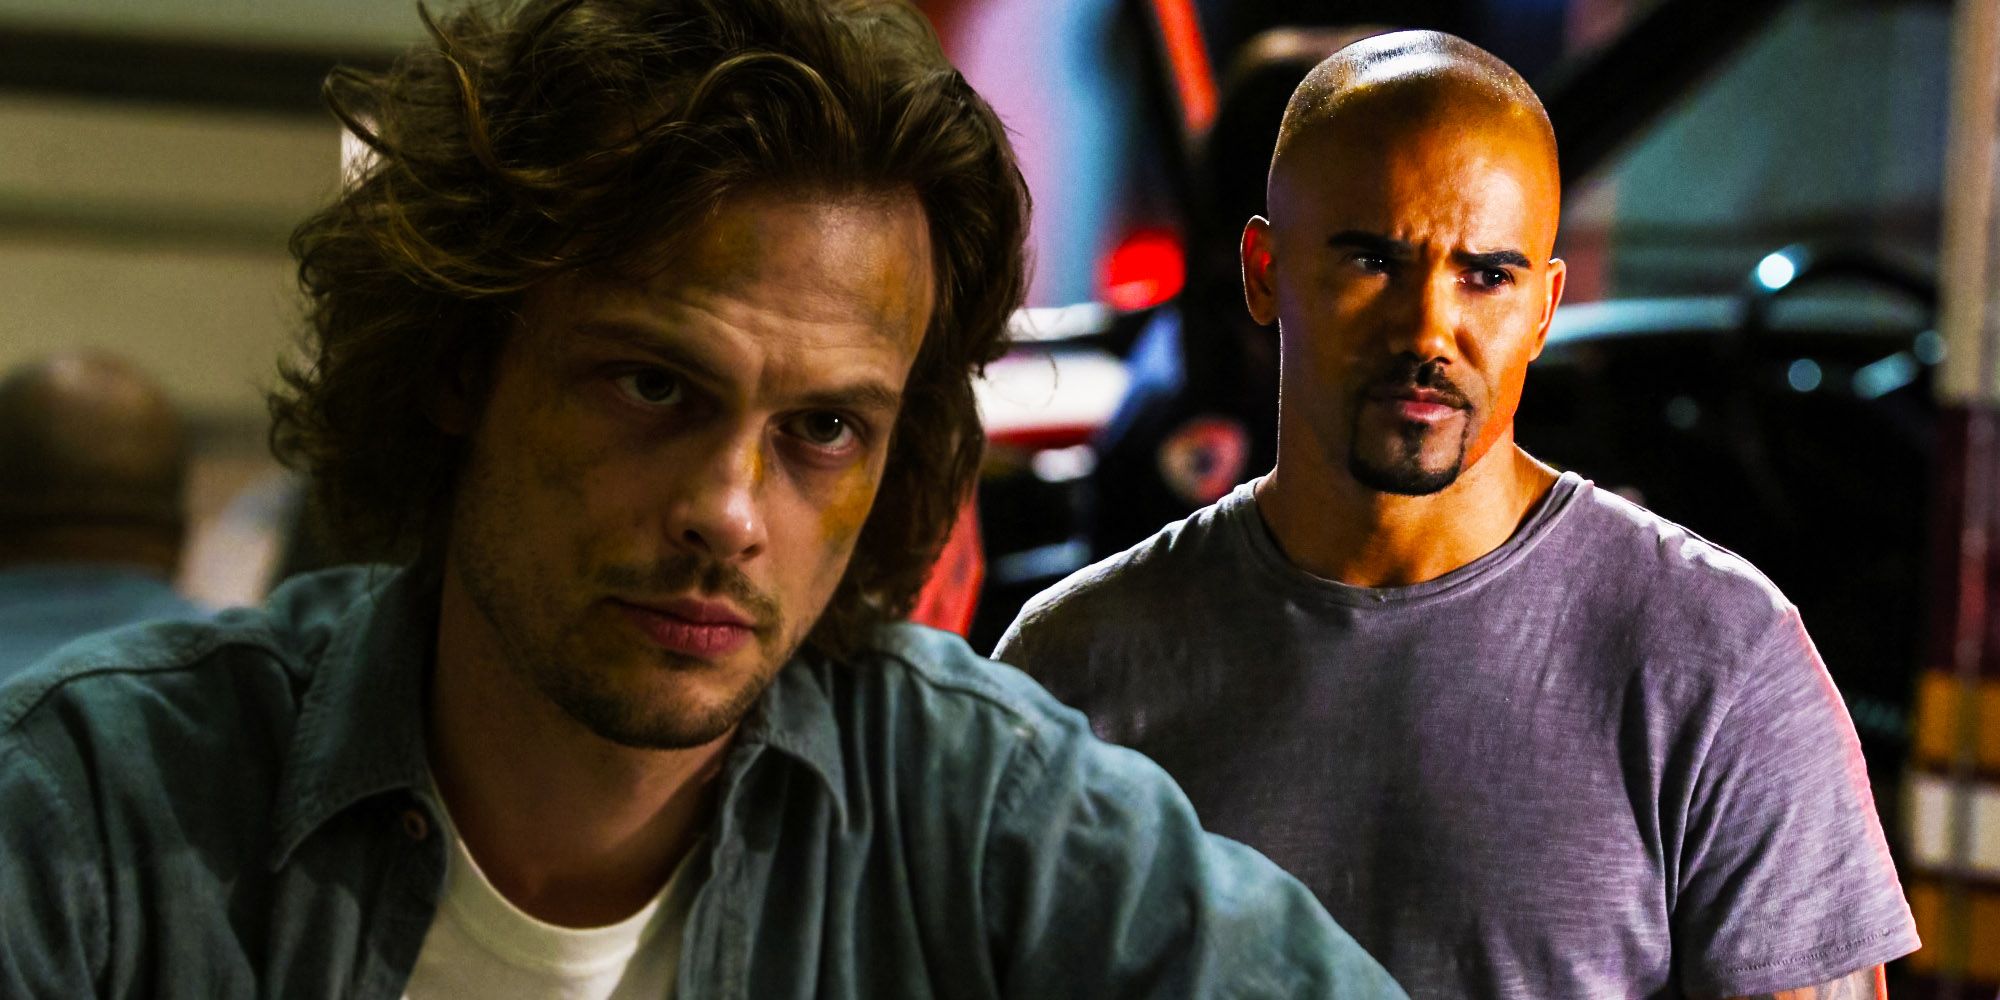 A composite image of Reid with dirk on his face imposed over Morgan looking on dramatically in Criminal Minds